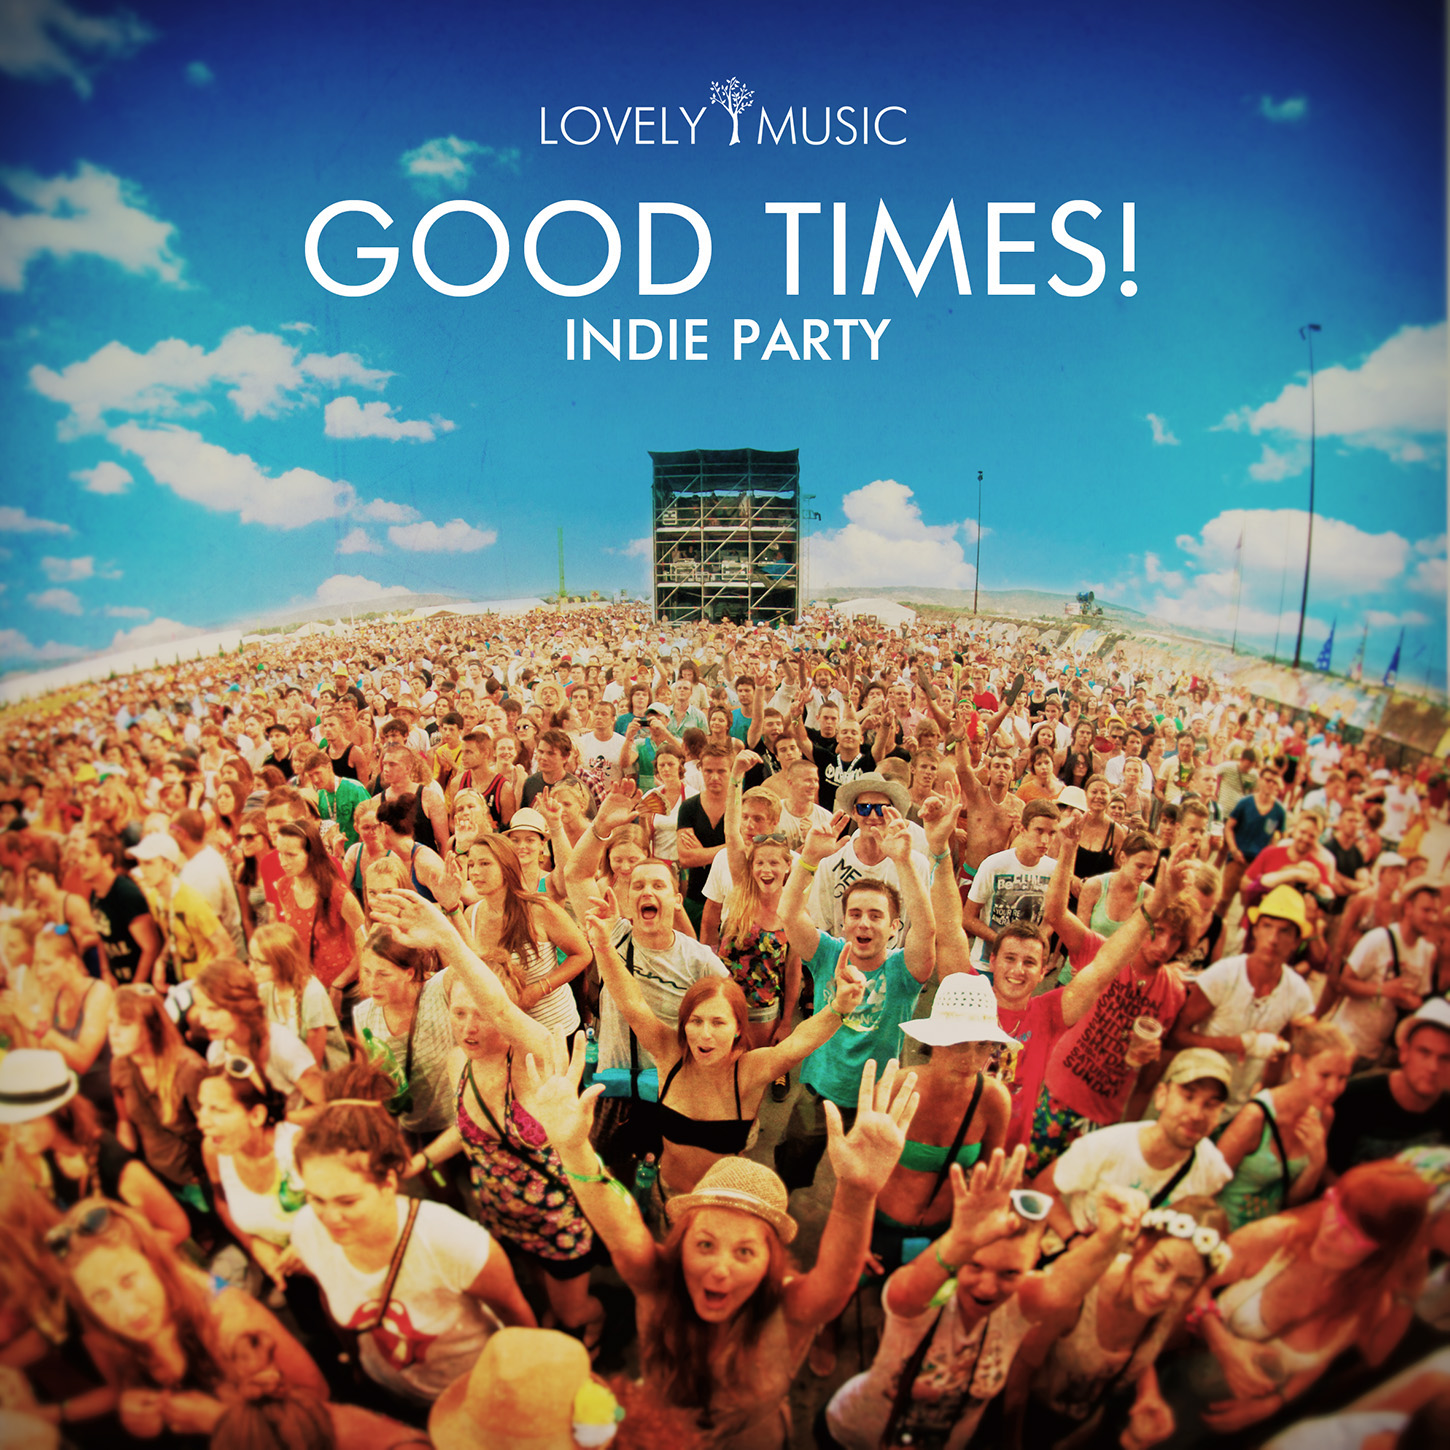 Lovely Music. Celebrate the good times. Love this music